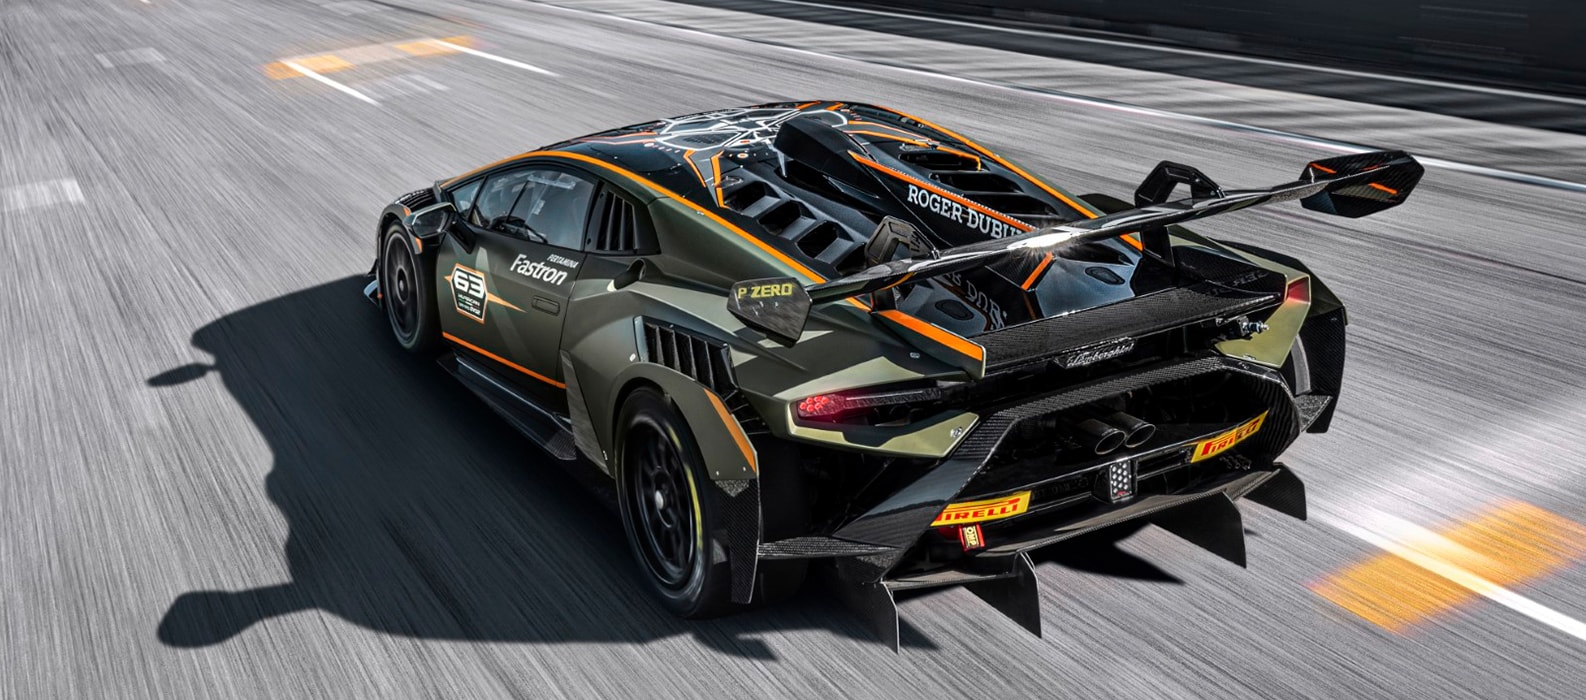 Super Trofeo Asia to Restart in 2023 with Six Double